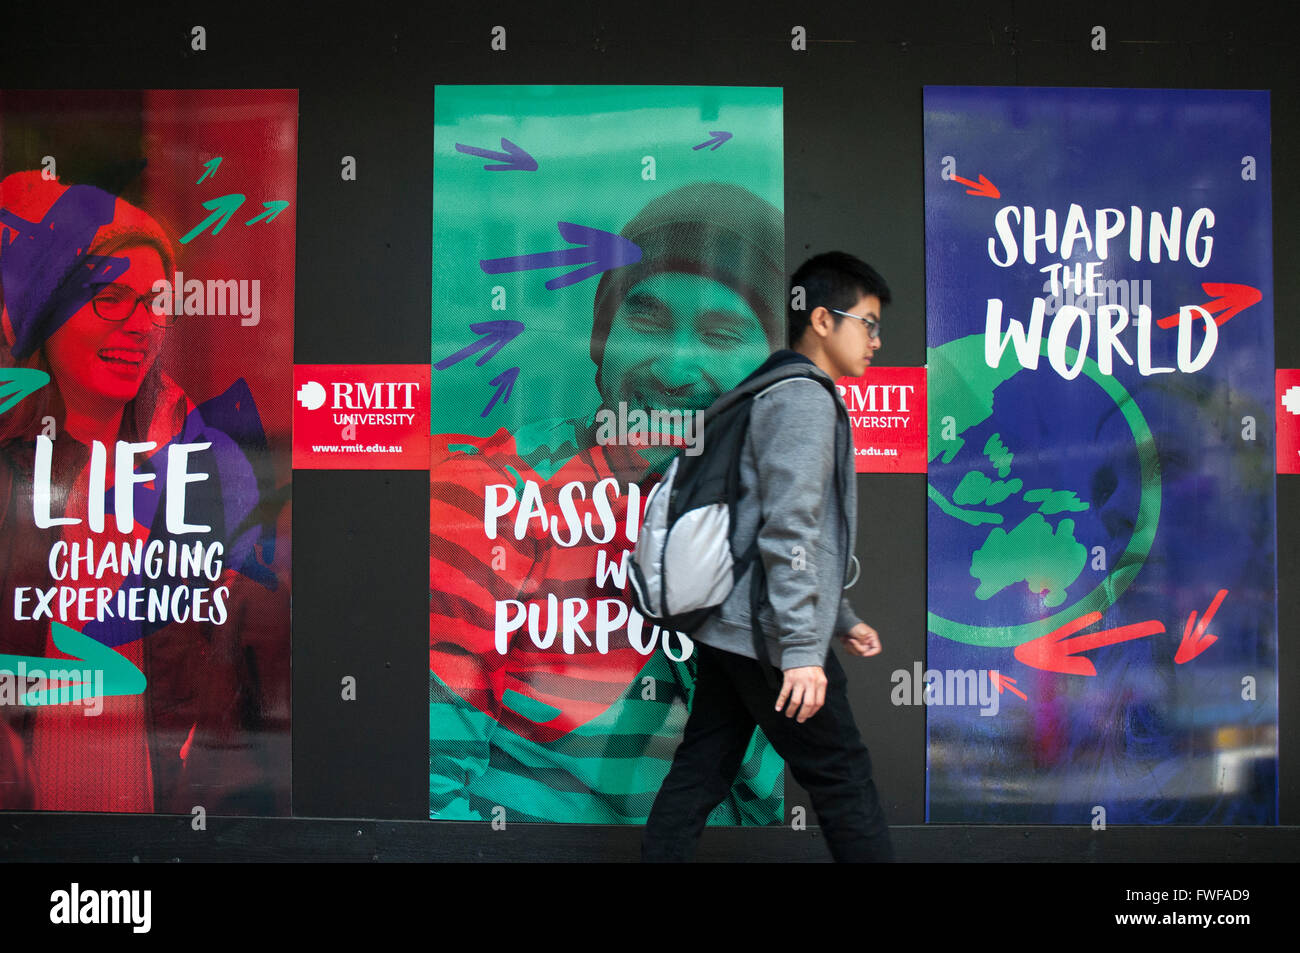 A student passing promotional banners outside the RMIT University buildings on Swanston Street, Melbourne Stock Photo